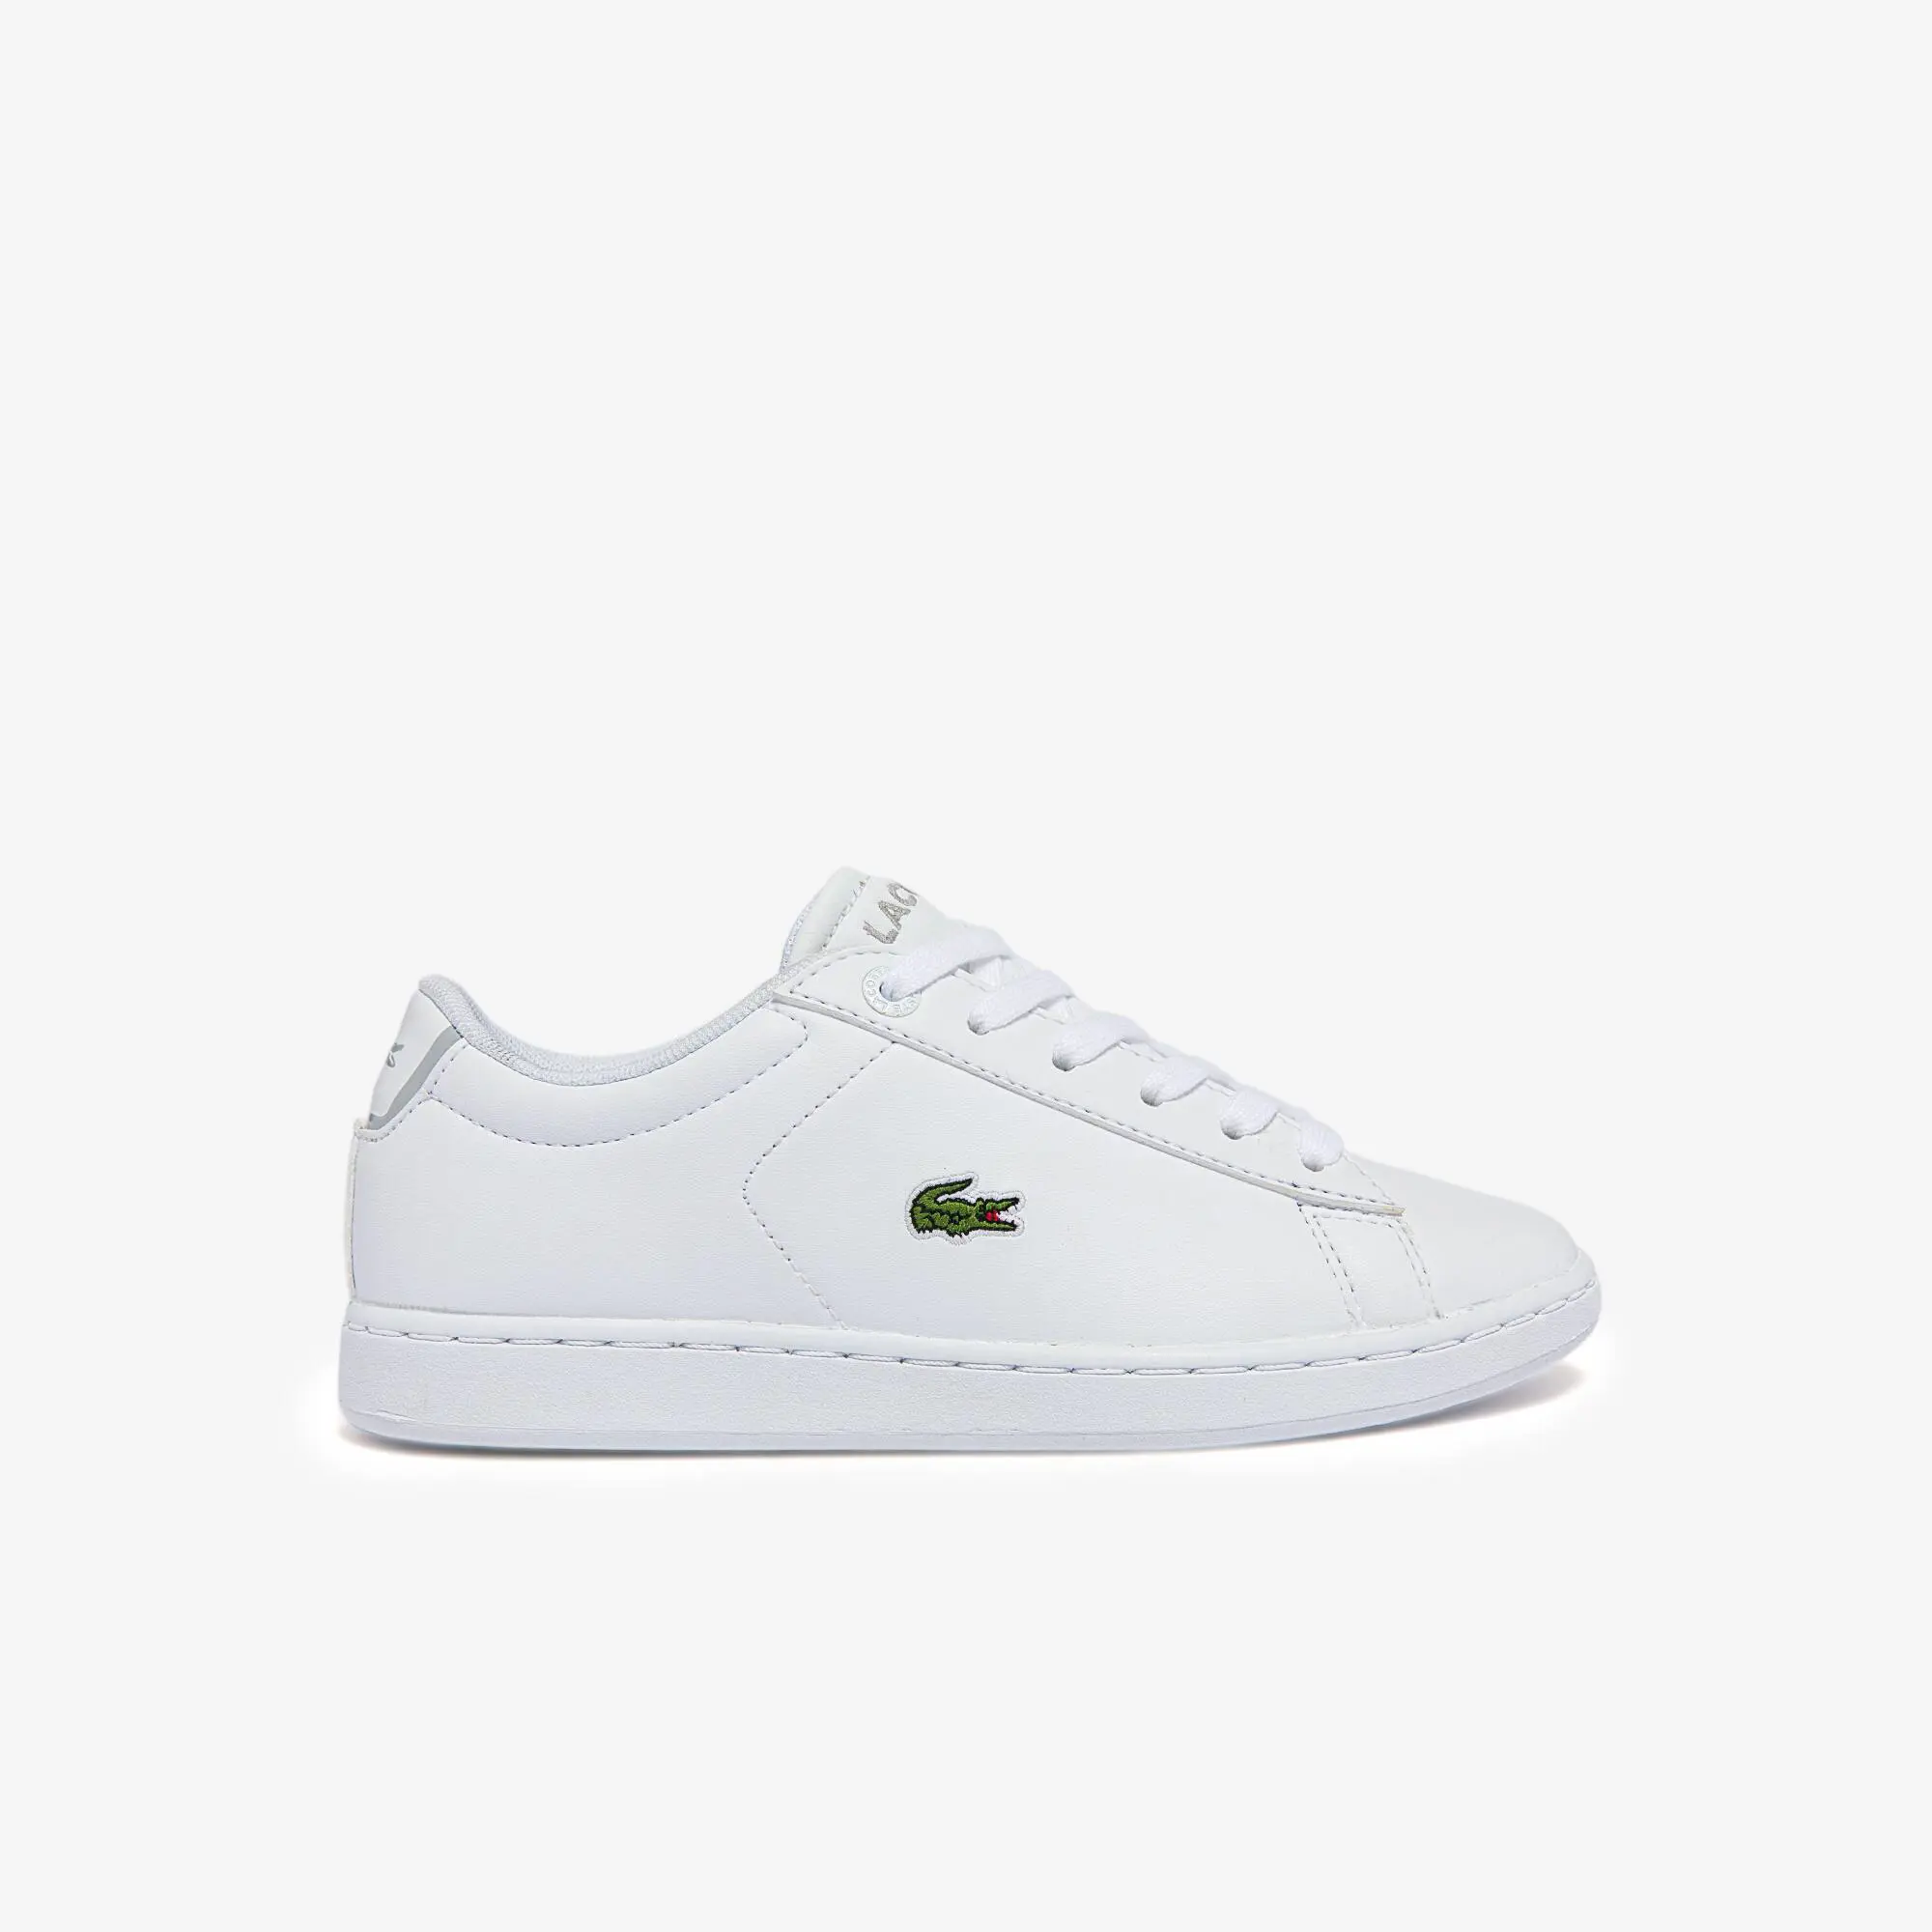 Lacoste Children's Carnaby Evo BL Synthetic Trainers. 1